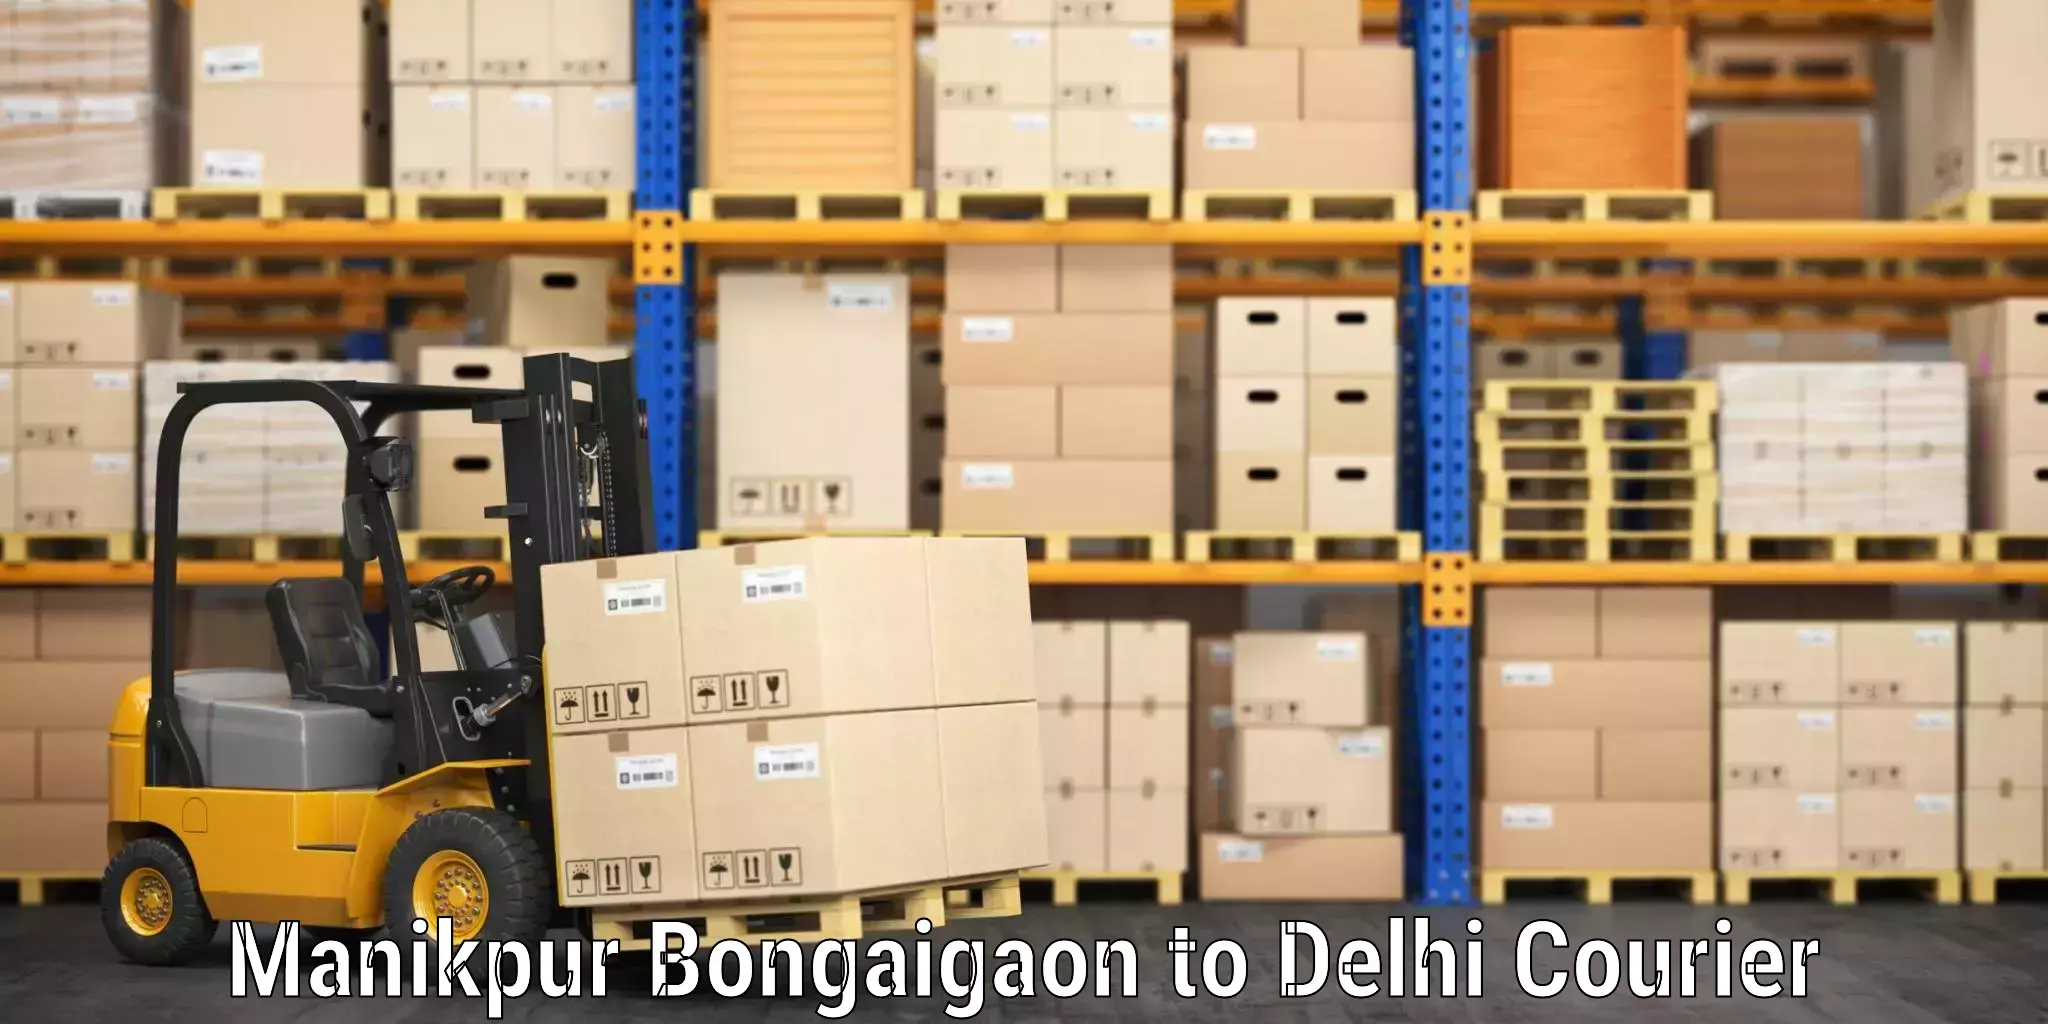 Luggage delivery network Manikpur Bongaigaon to NCR